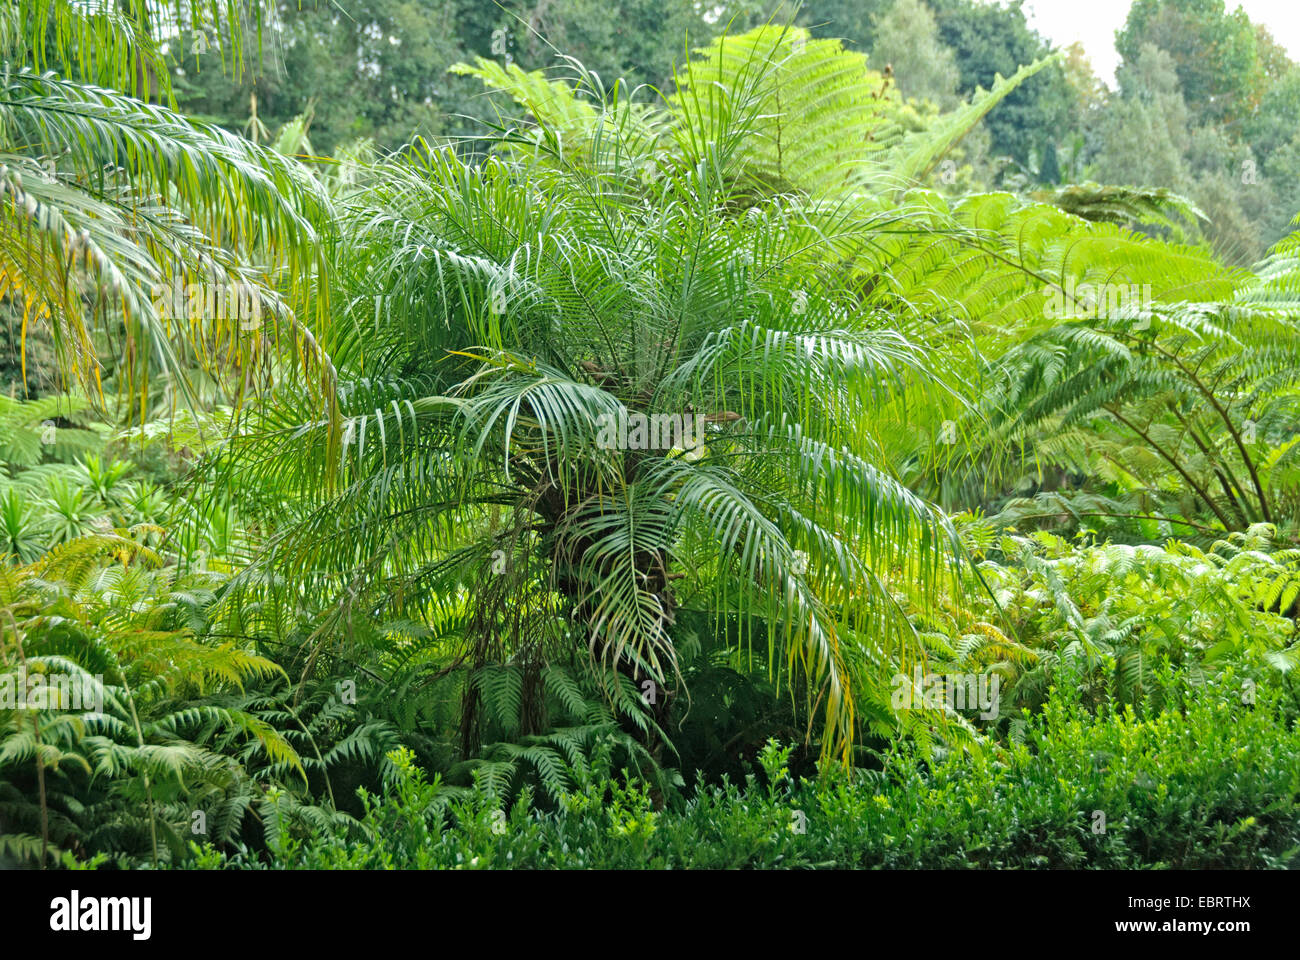 pygmy date palm, miniature date palm (Phoenix roebelenii), in a mediterranean garden together with tree ferns, Portugal, Madeira, Monte Tropical Garden Stock Photo